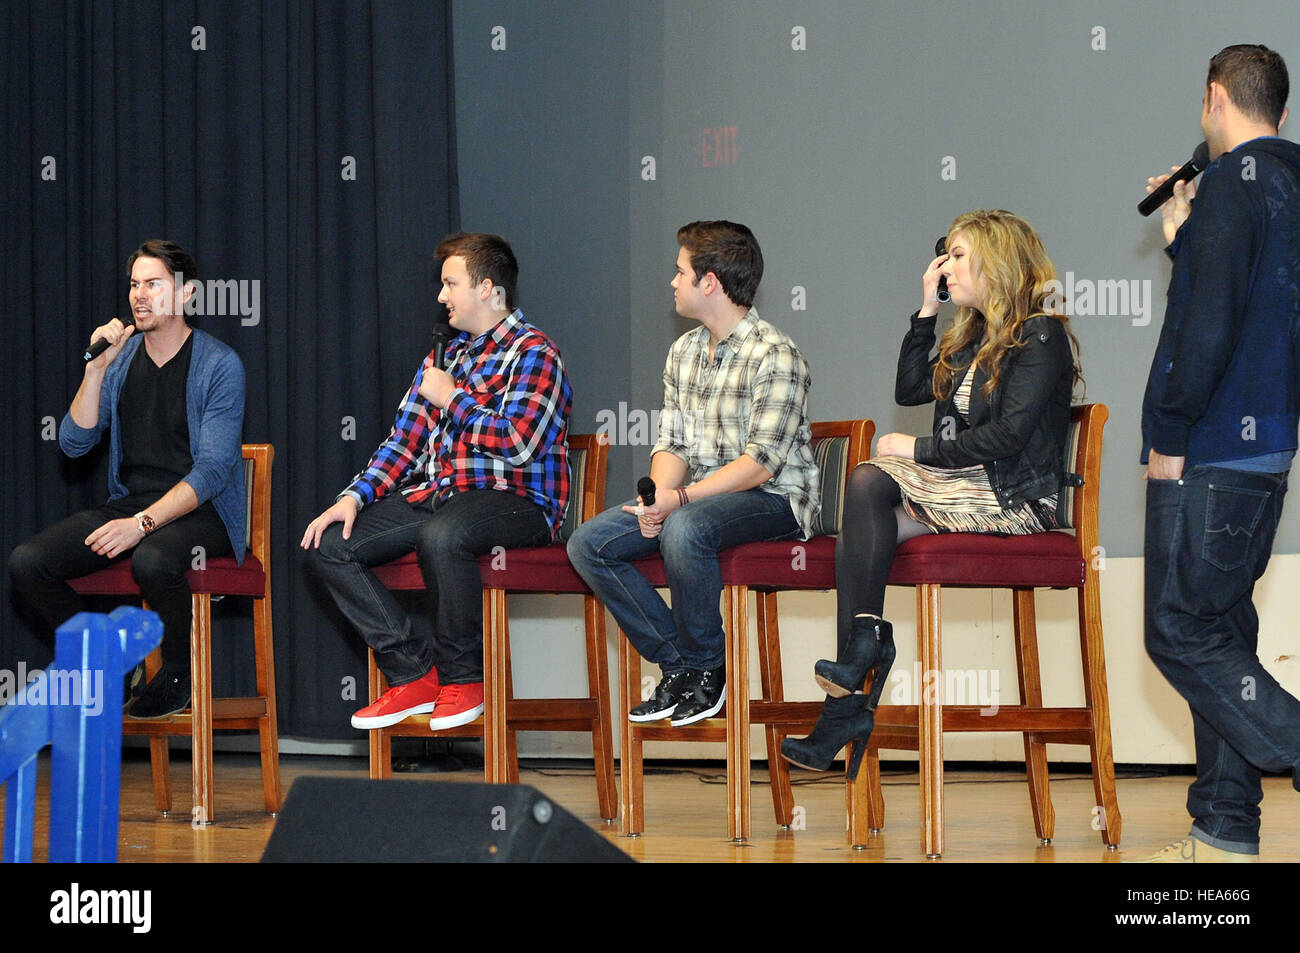 120112-F-UU335-154     The cast of Nickelodeon hit 'iCarly' take the time to answer questions and pose fro the Joint Base McGuire-Dix-Lakehurst community during a special screening of an upcoming episode of 'iCarly' dealing with military family separation, Jan. 12.  Wayne Russell Stock Photo